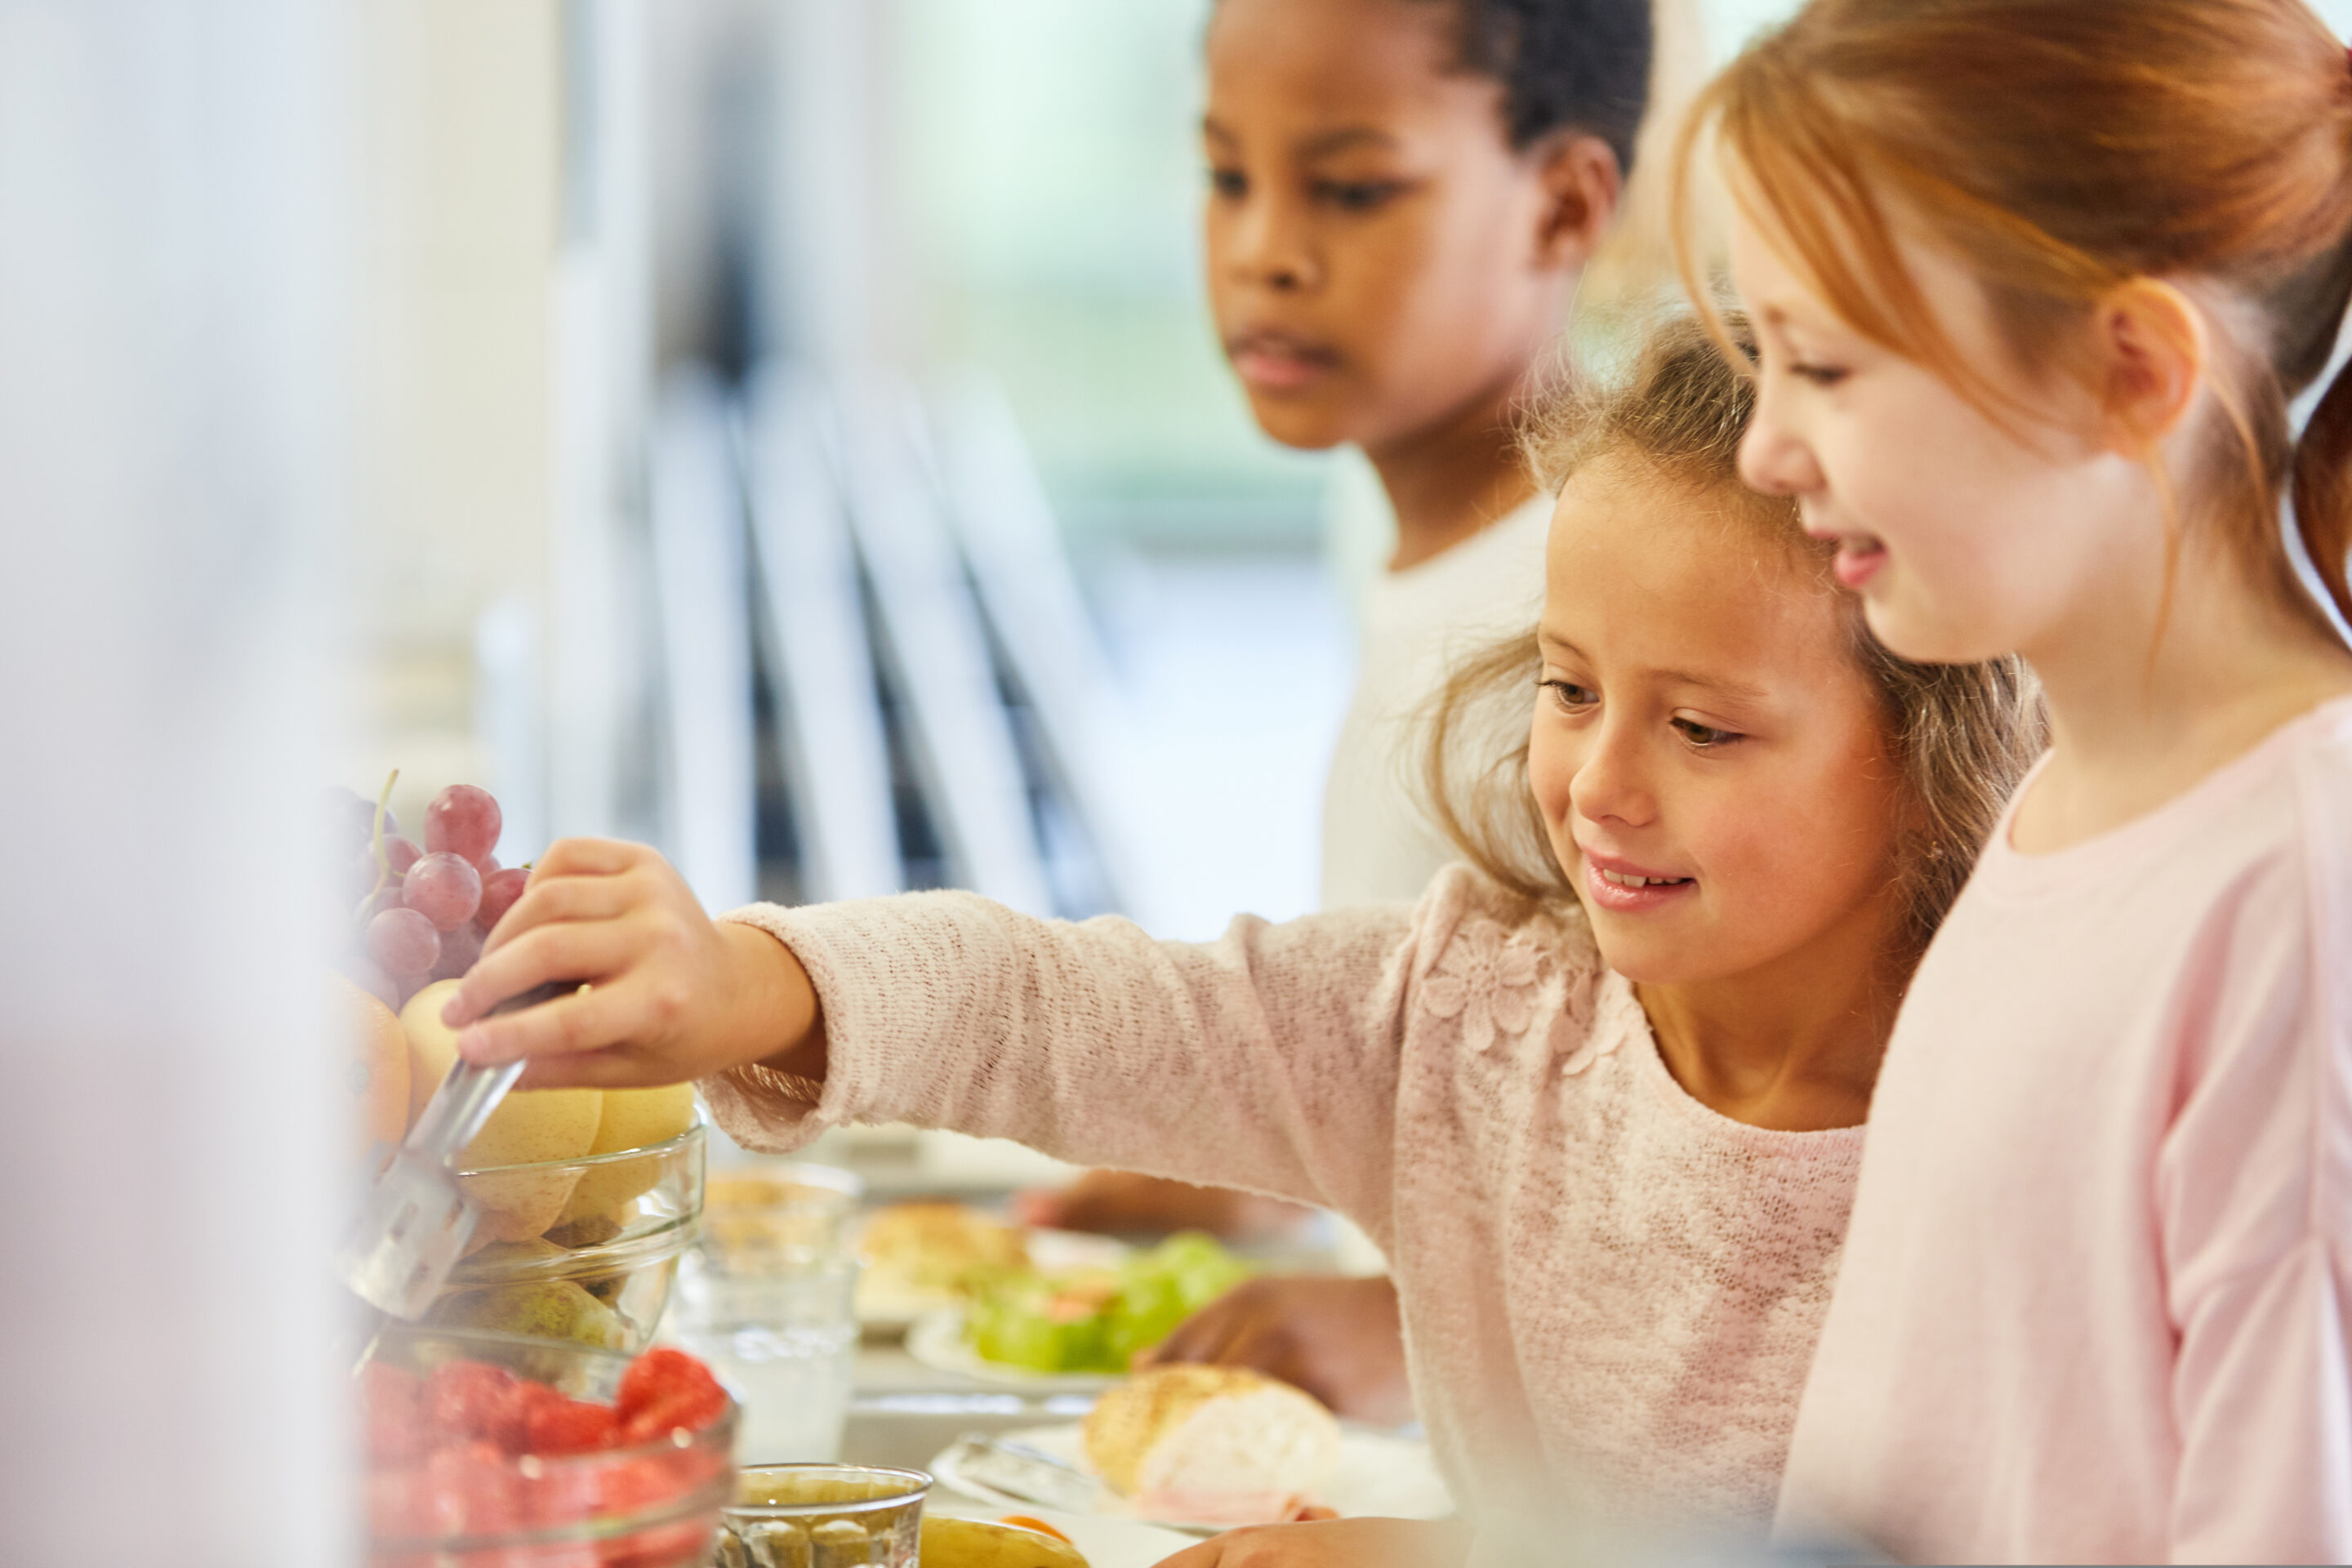 MEPs and citizens agree: children should have access to healthy and sustainable food in schools